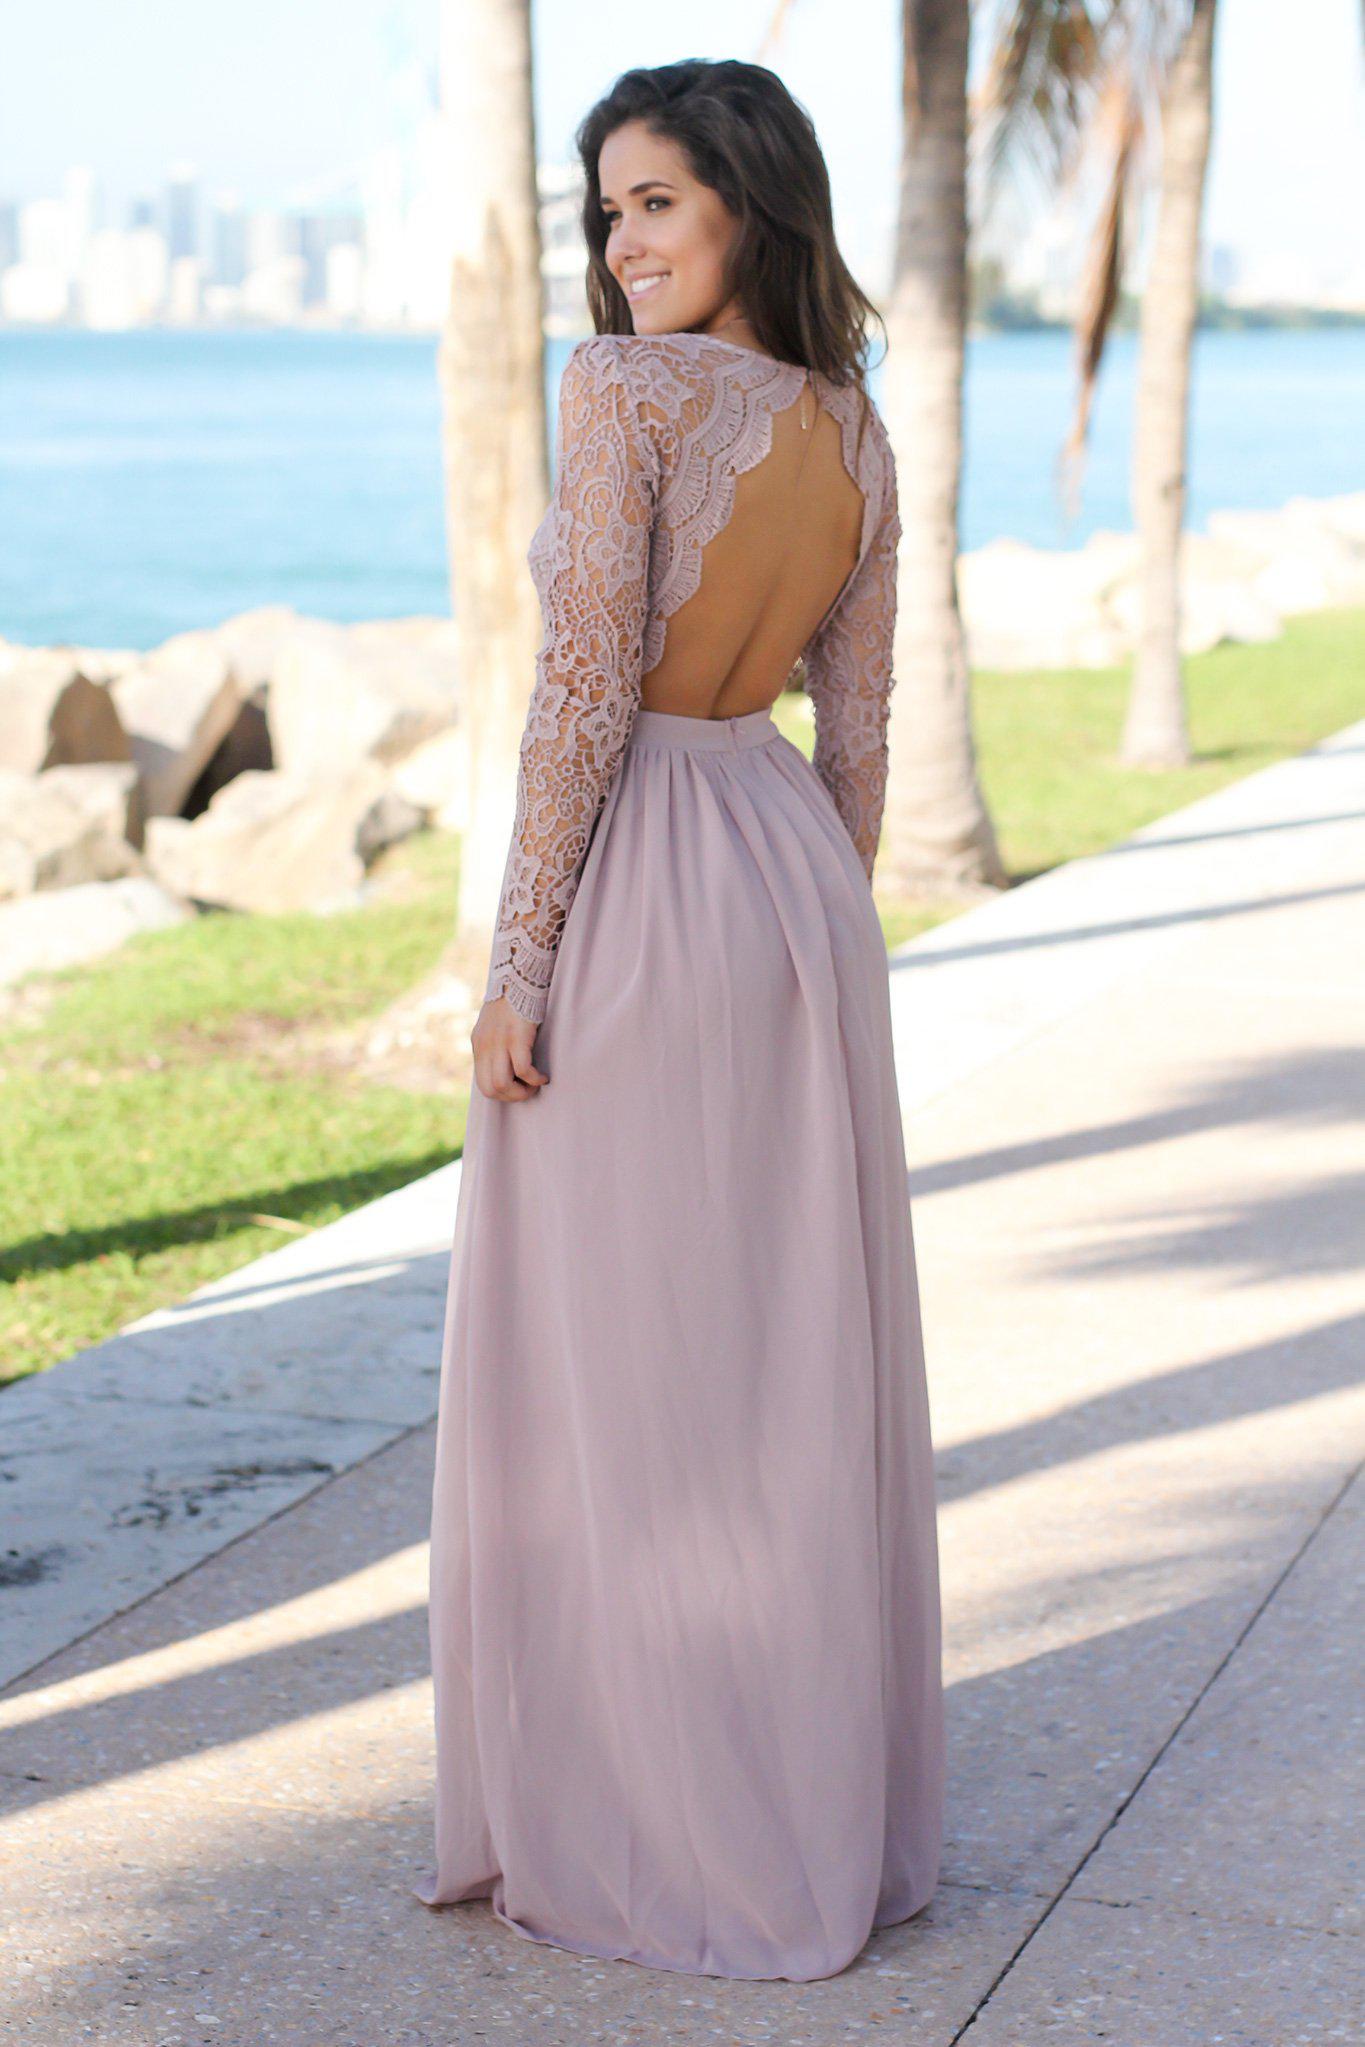 Tan Crochet Maxi Dress with Open Back and Long Sleeves